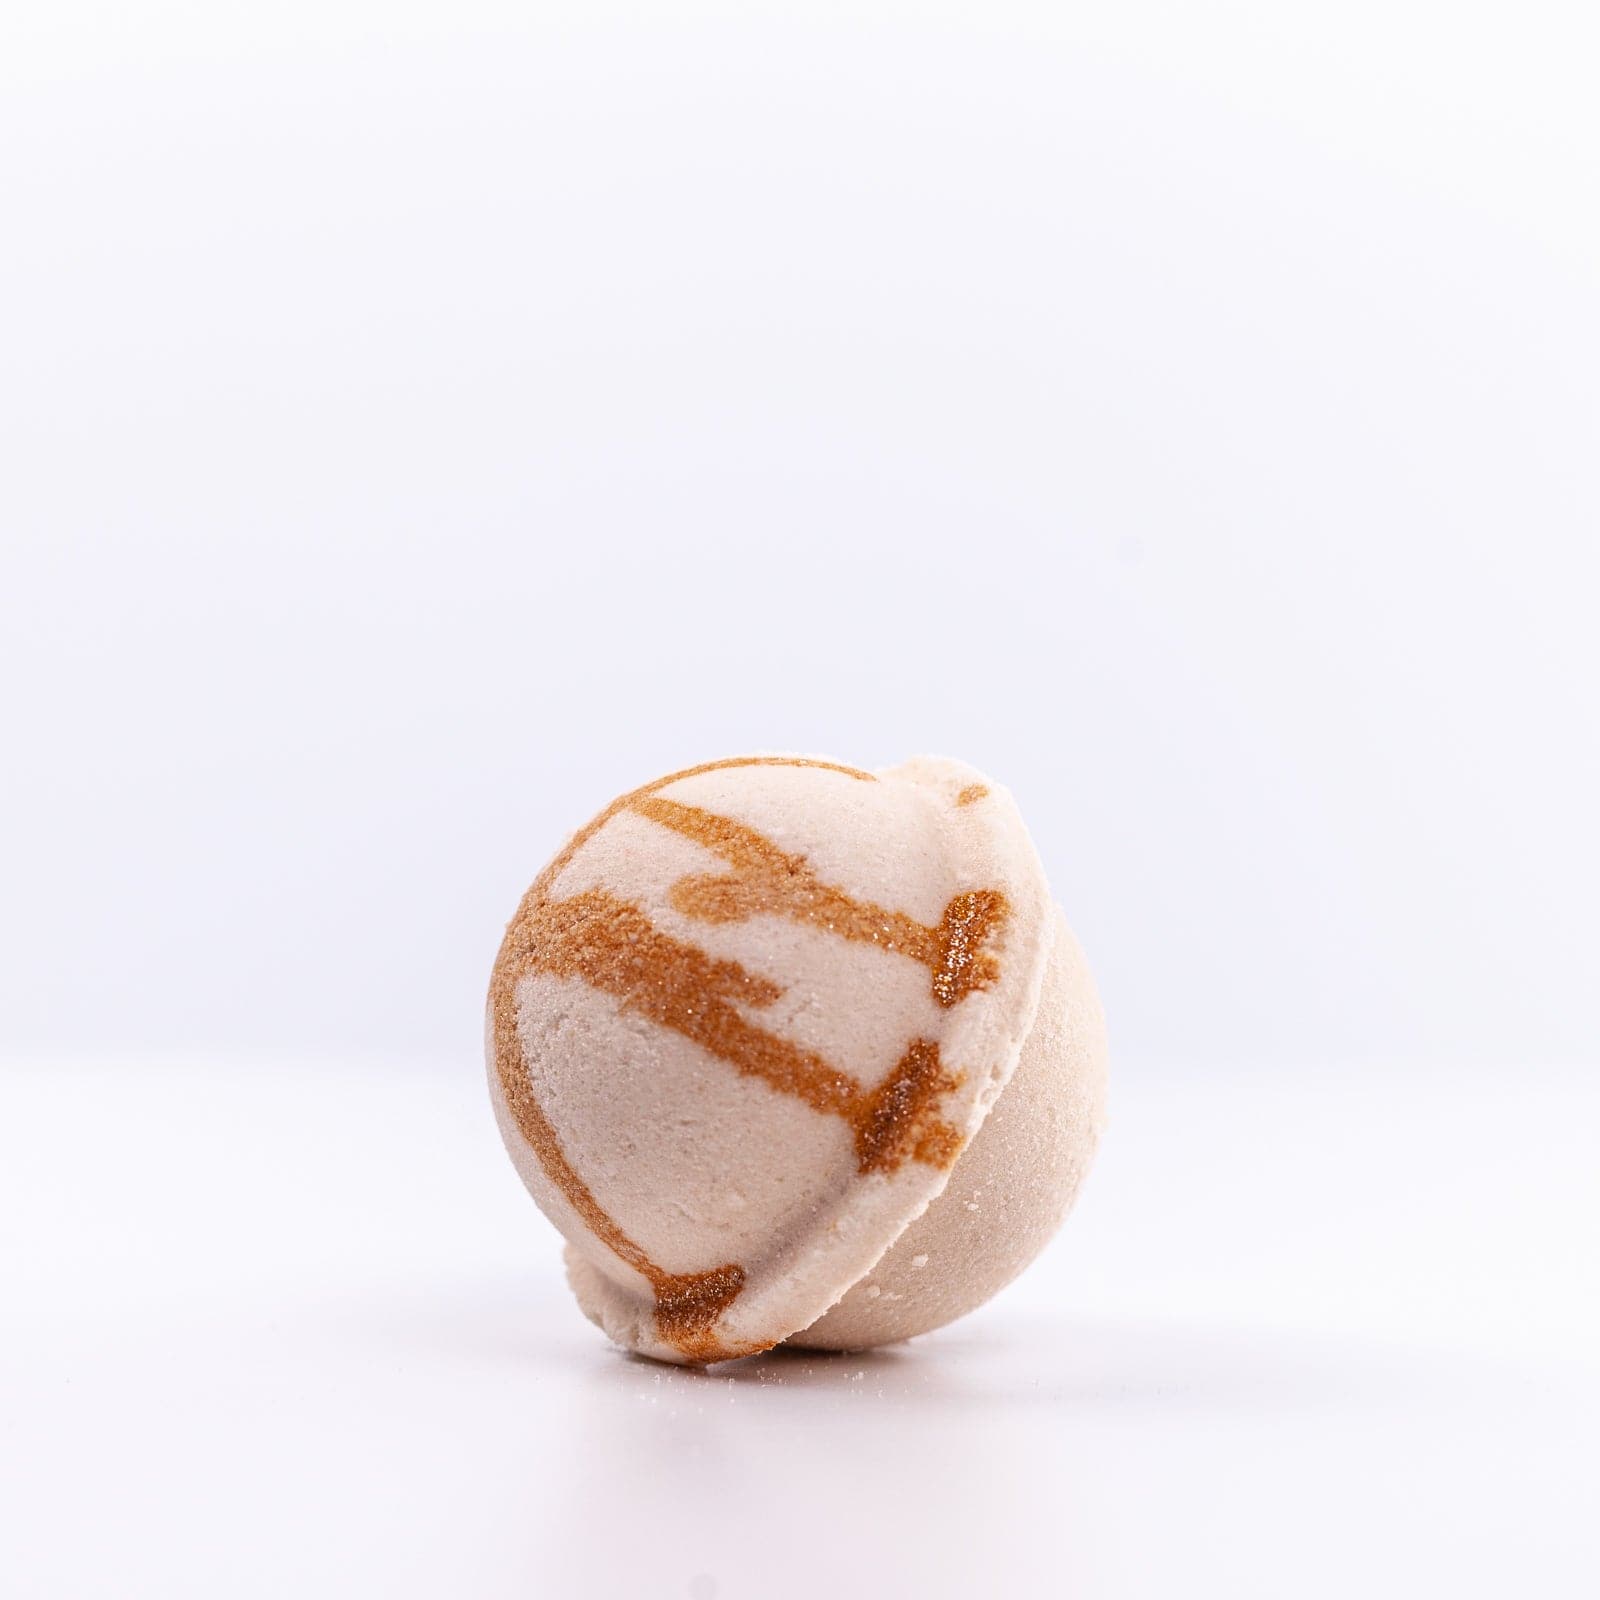 Bronze and brown Oatmeal Honey Bath Bomb resting on side against white background